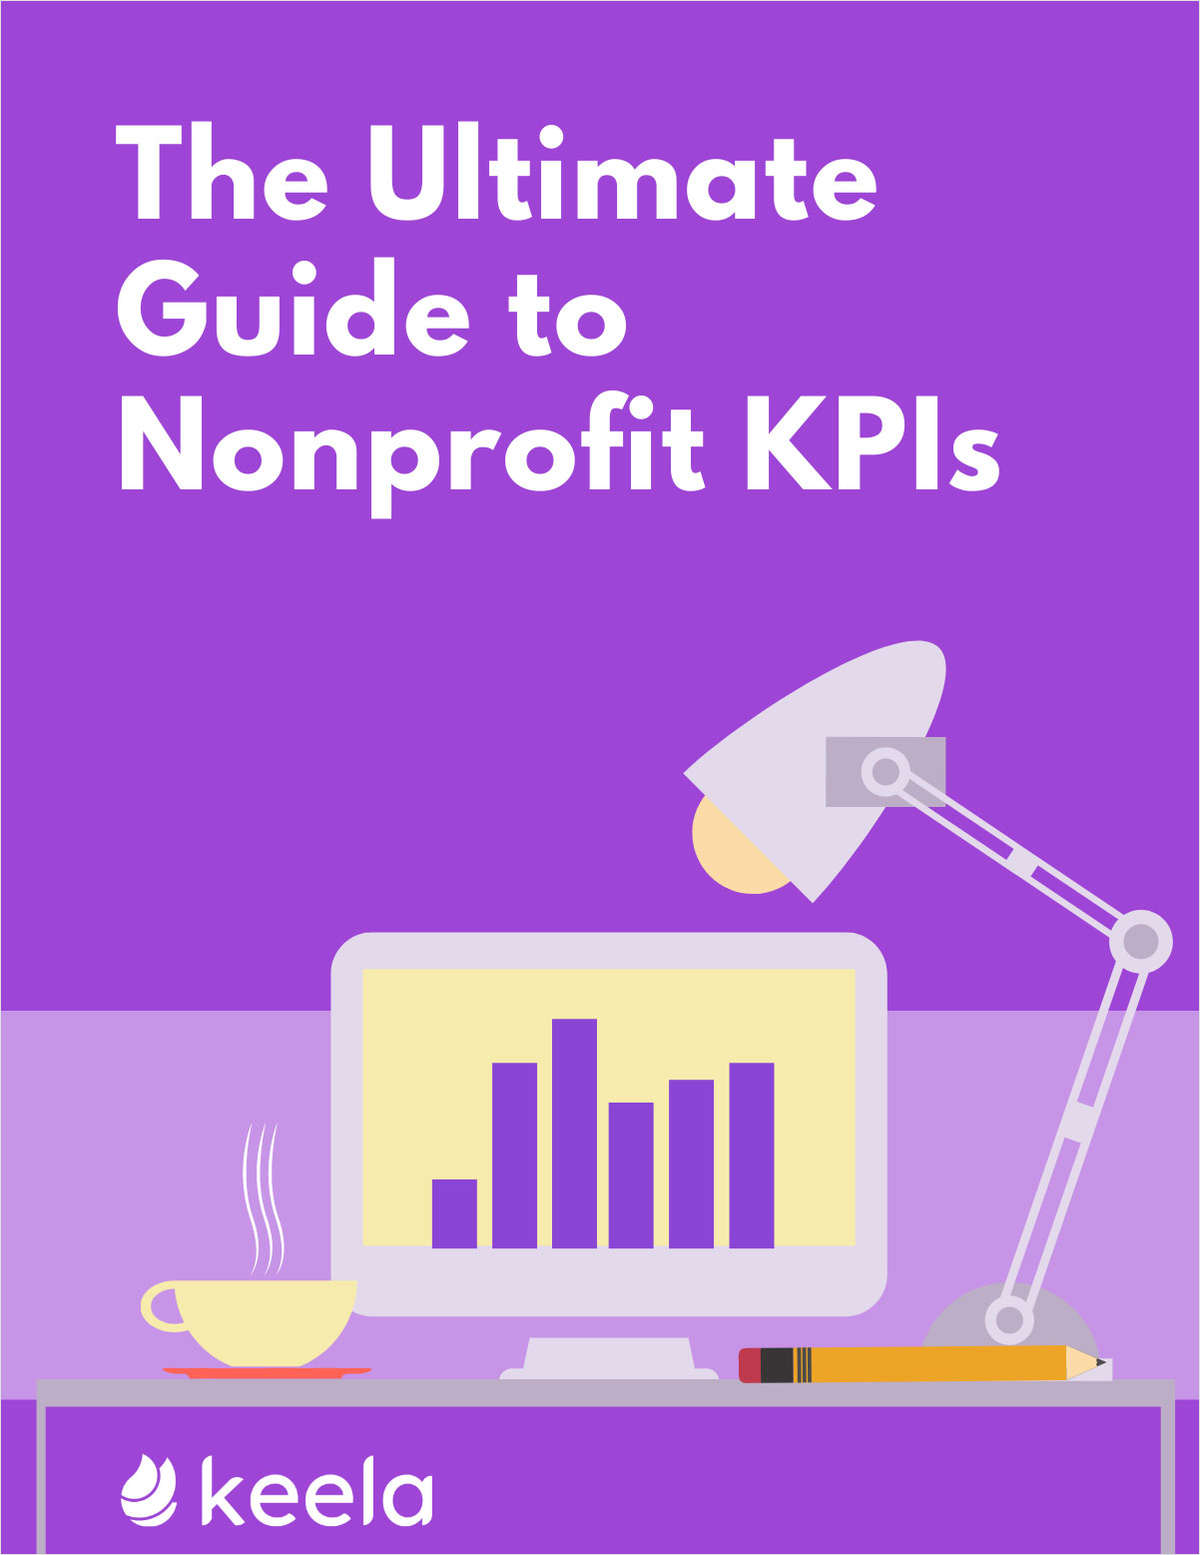 The Ultimate Guide to Nonprofit KPIs